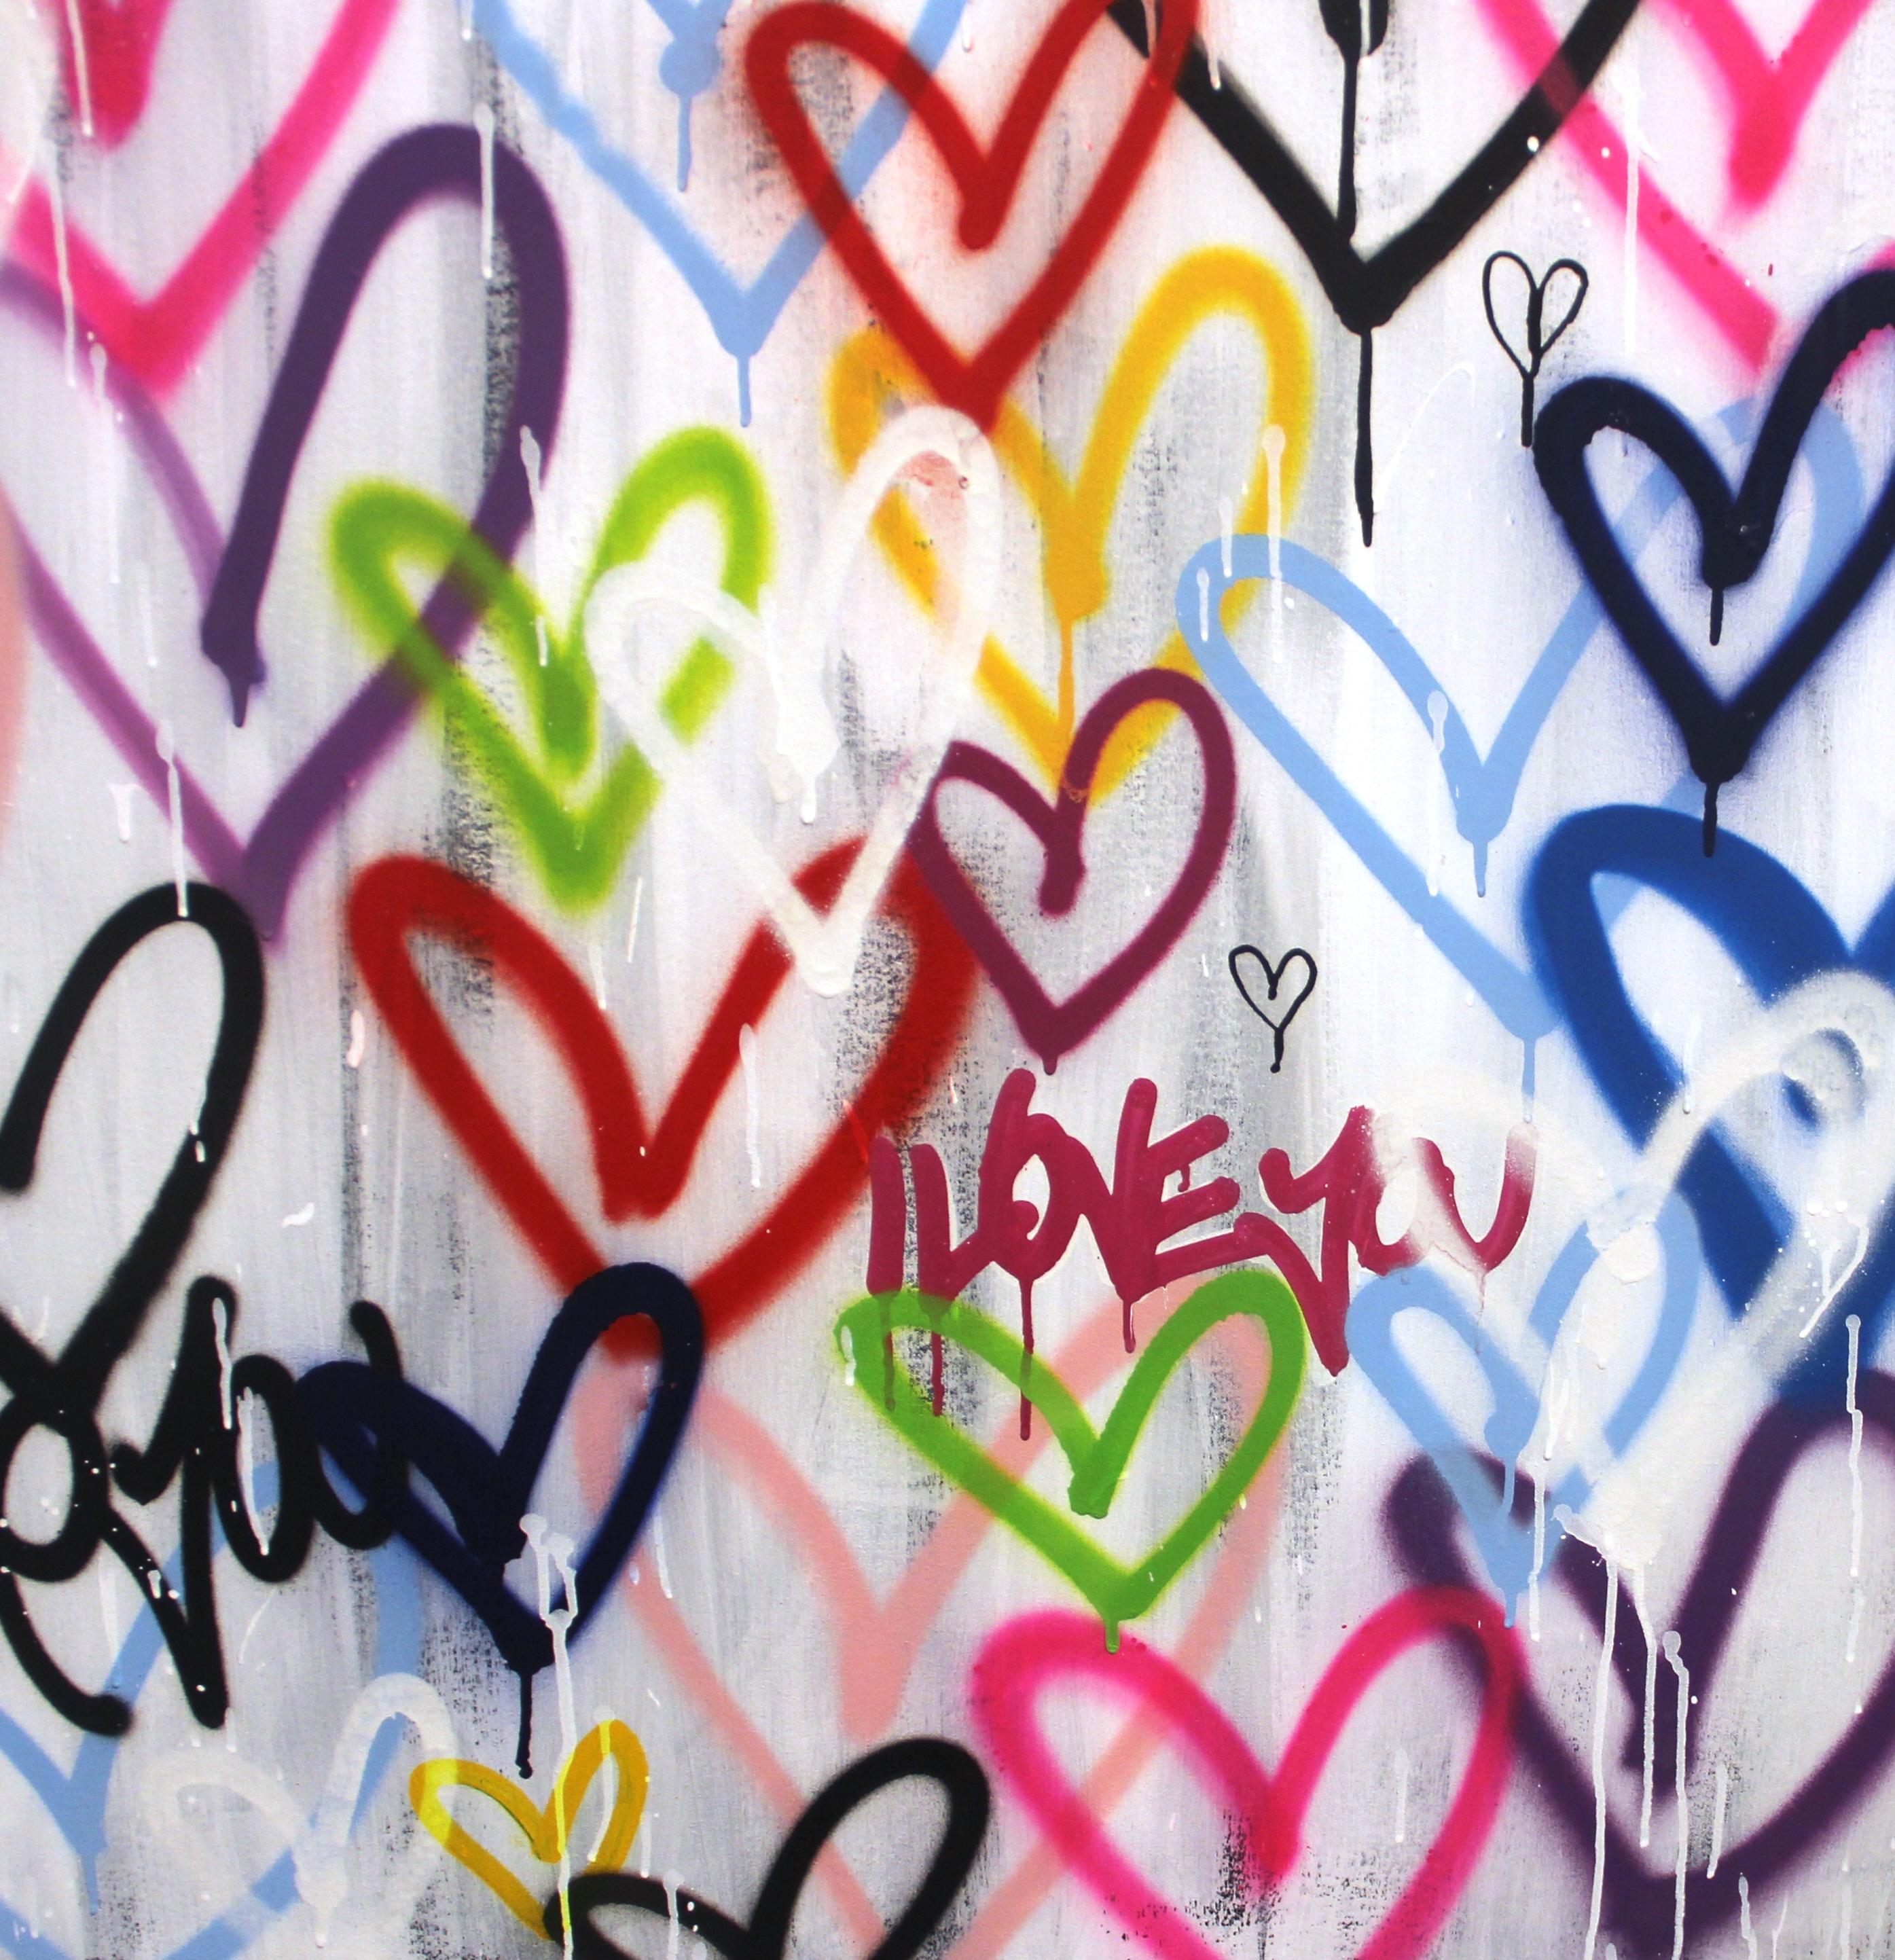 Raining Hearts - Street Art Painting by Amber Goldhammer